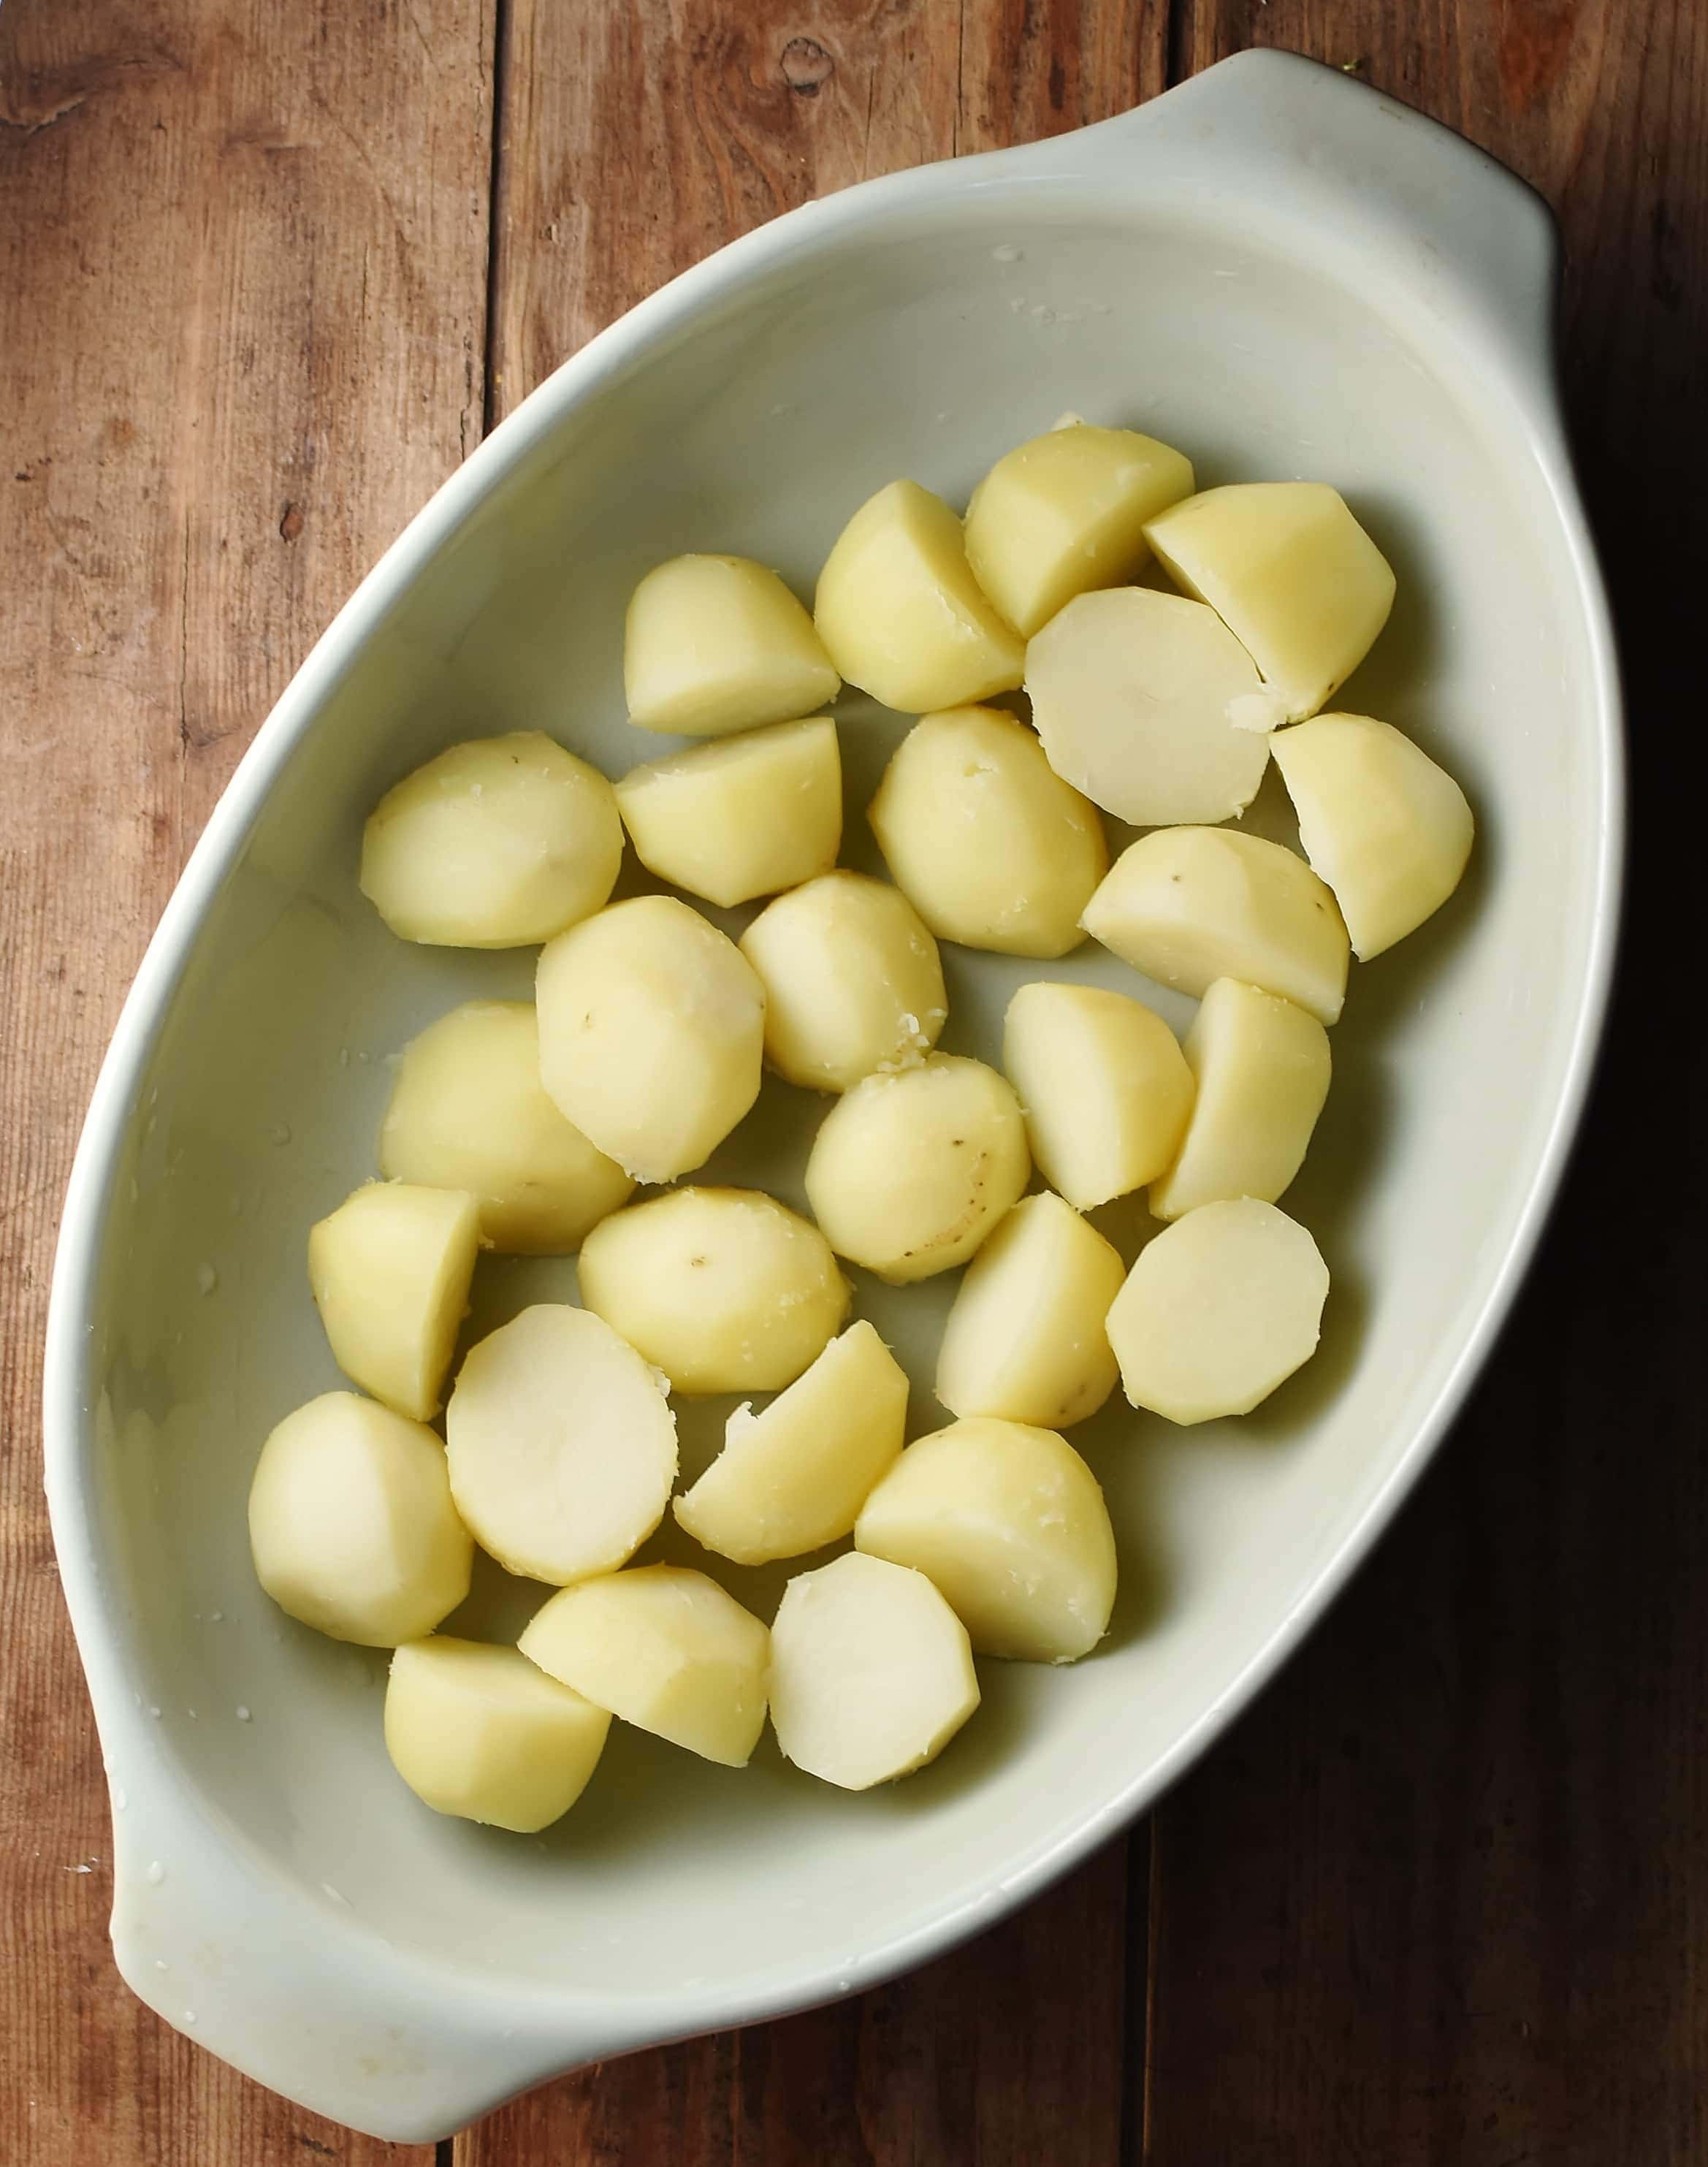 Peeled, halved potatoes in oval casserole dish.